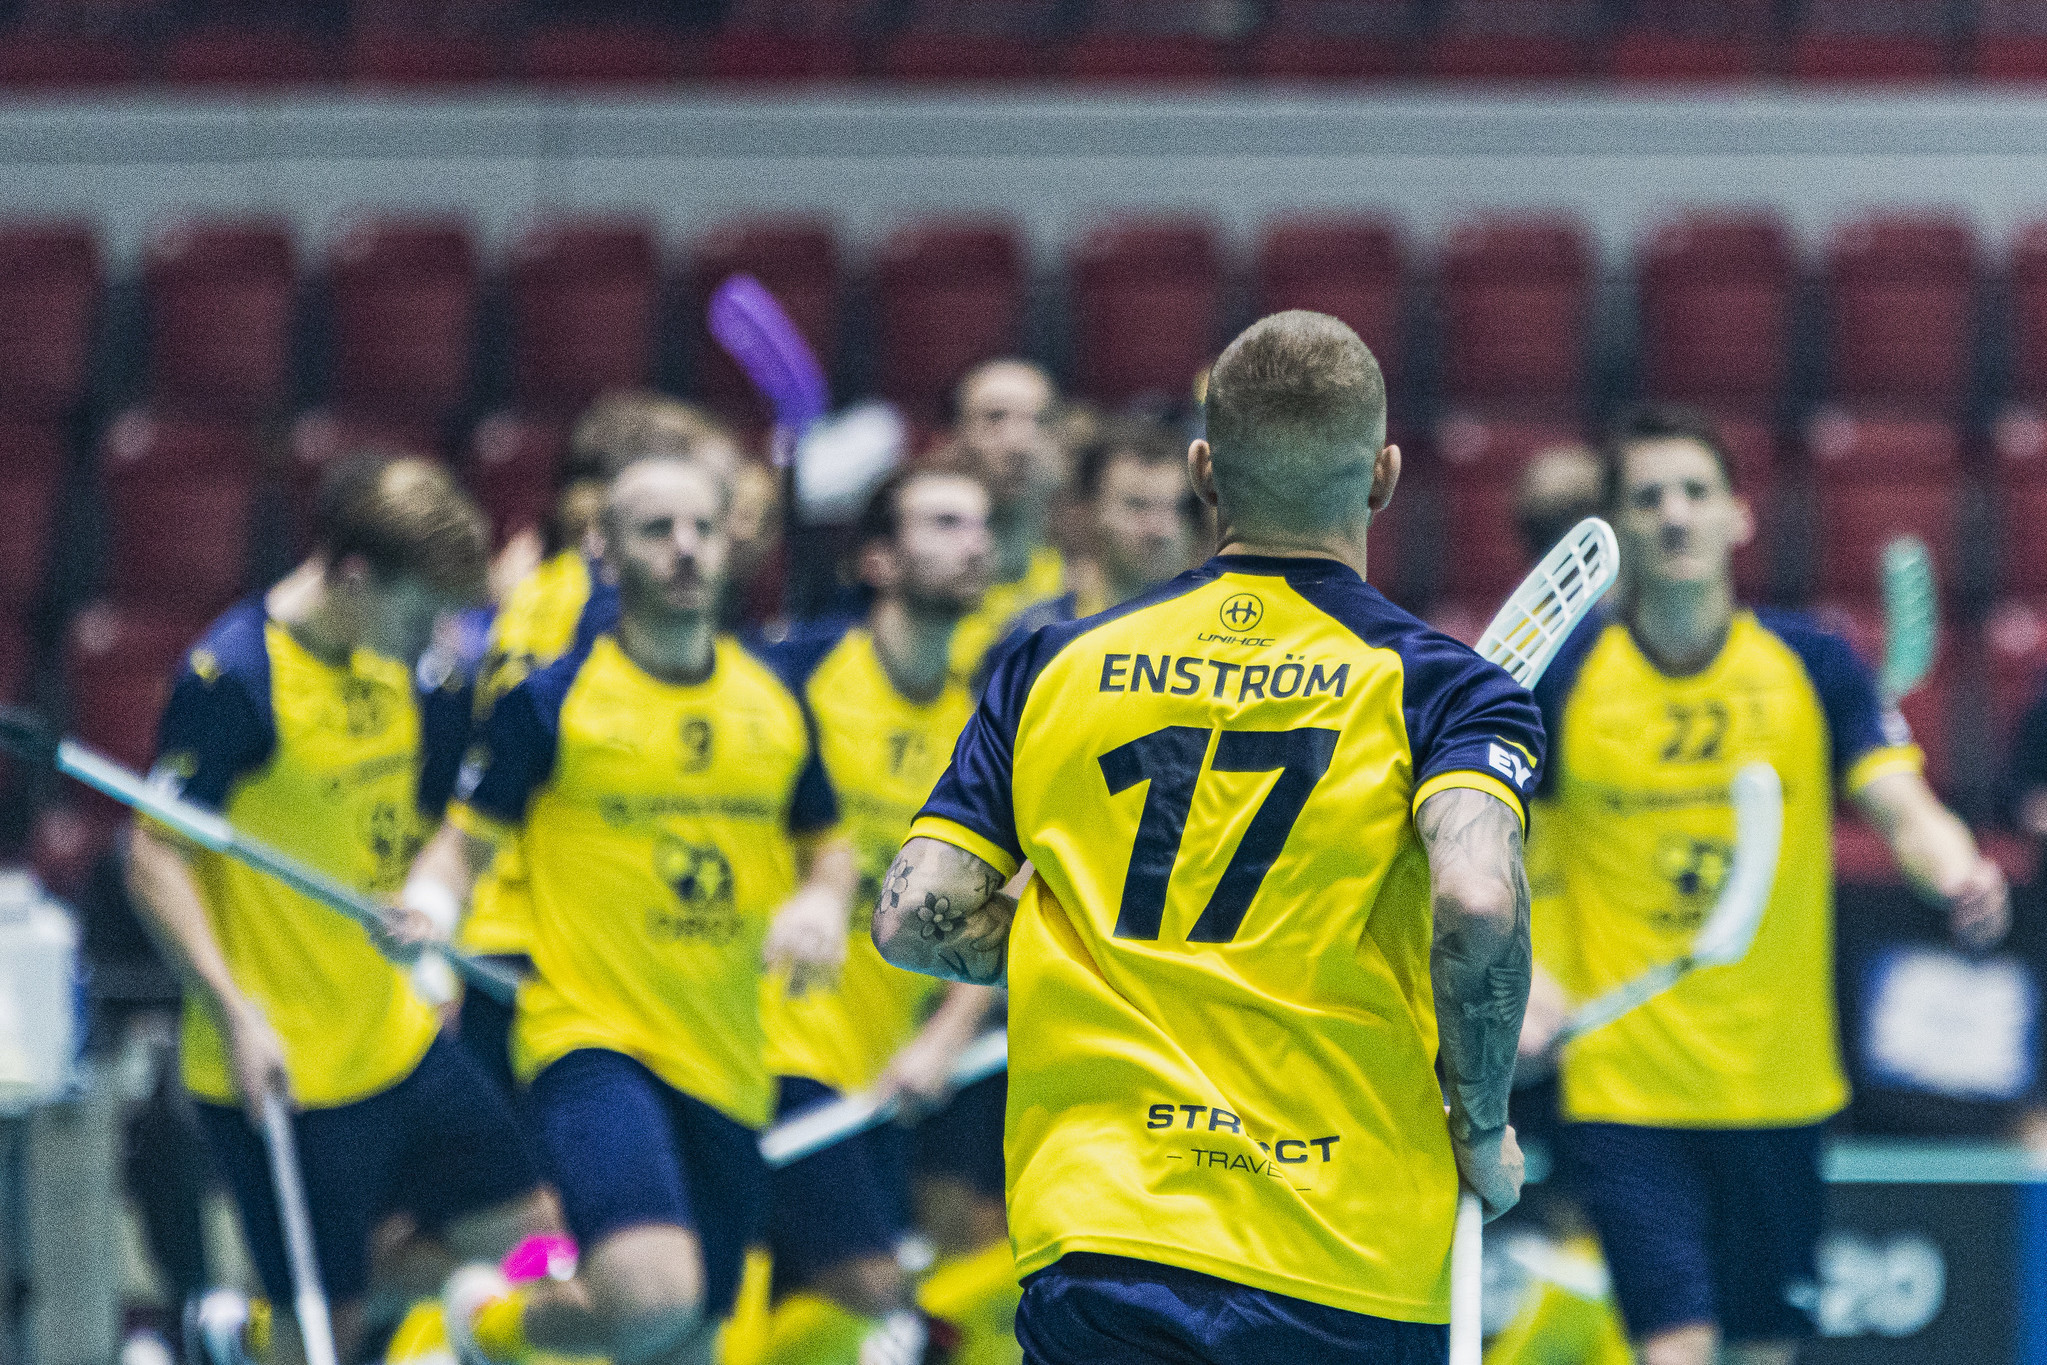 Sweden secure opening-day win over Latvia at Men's World Floorball Championship